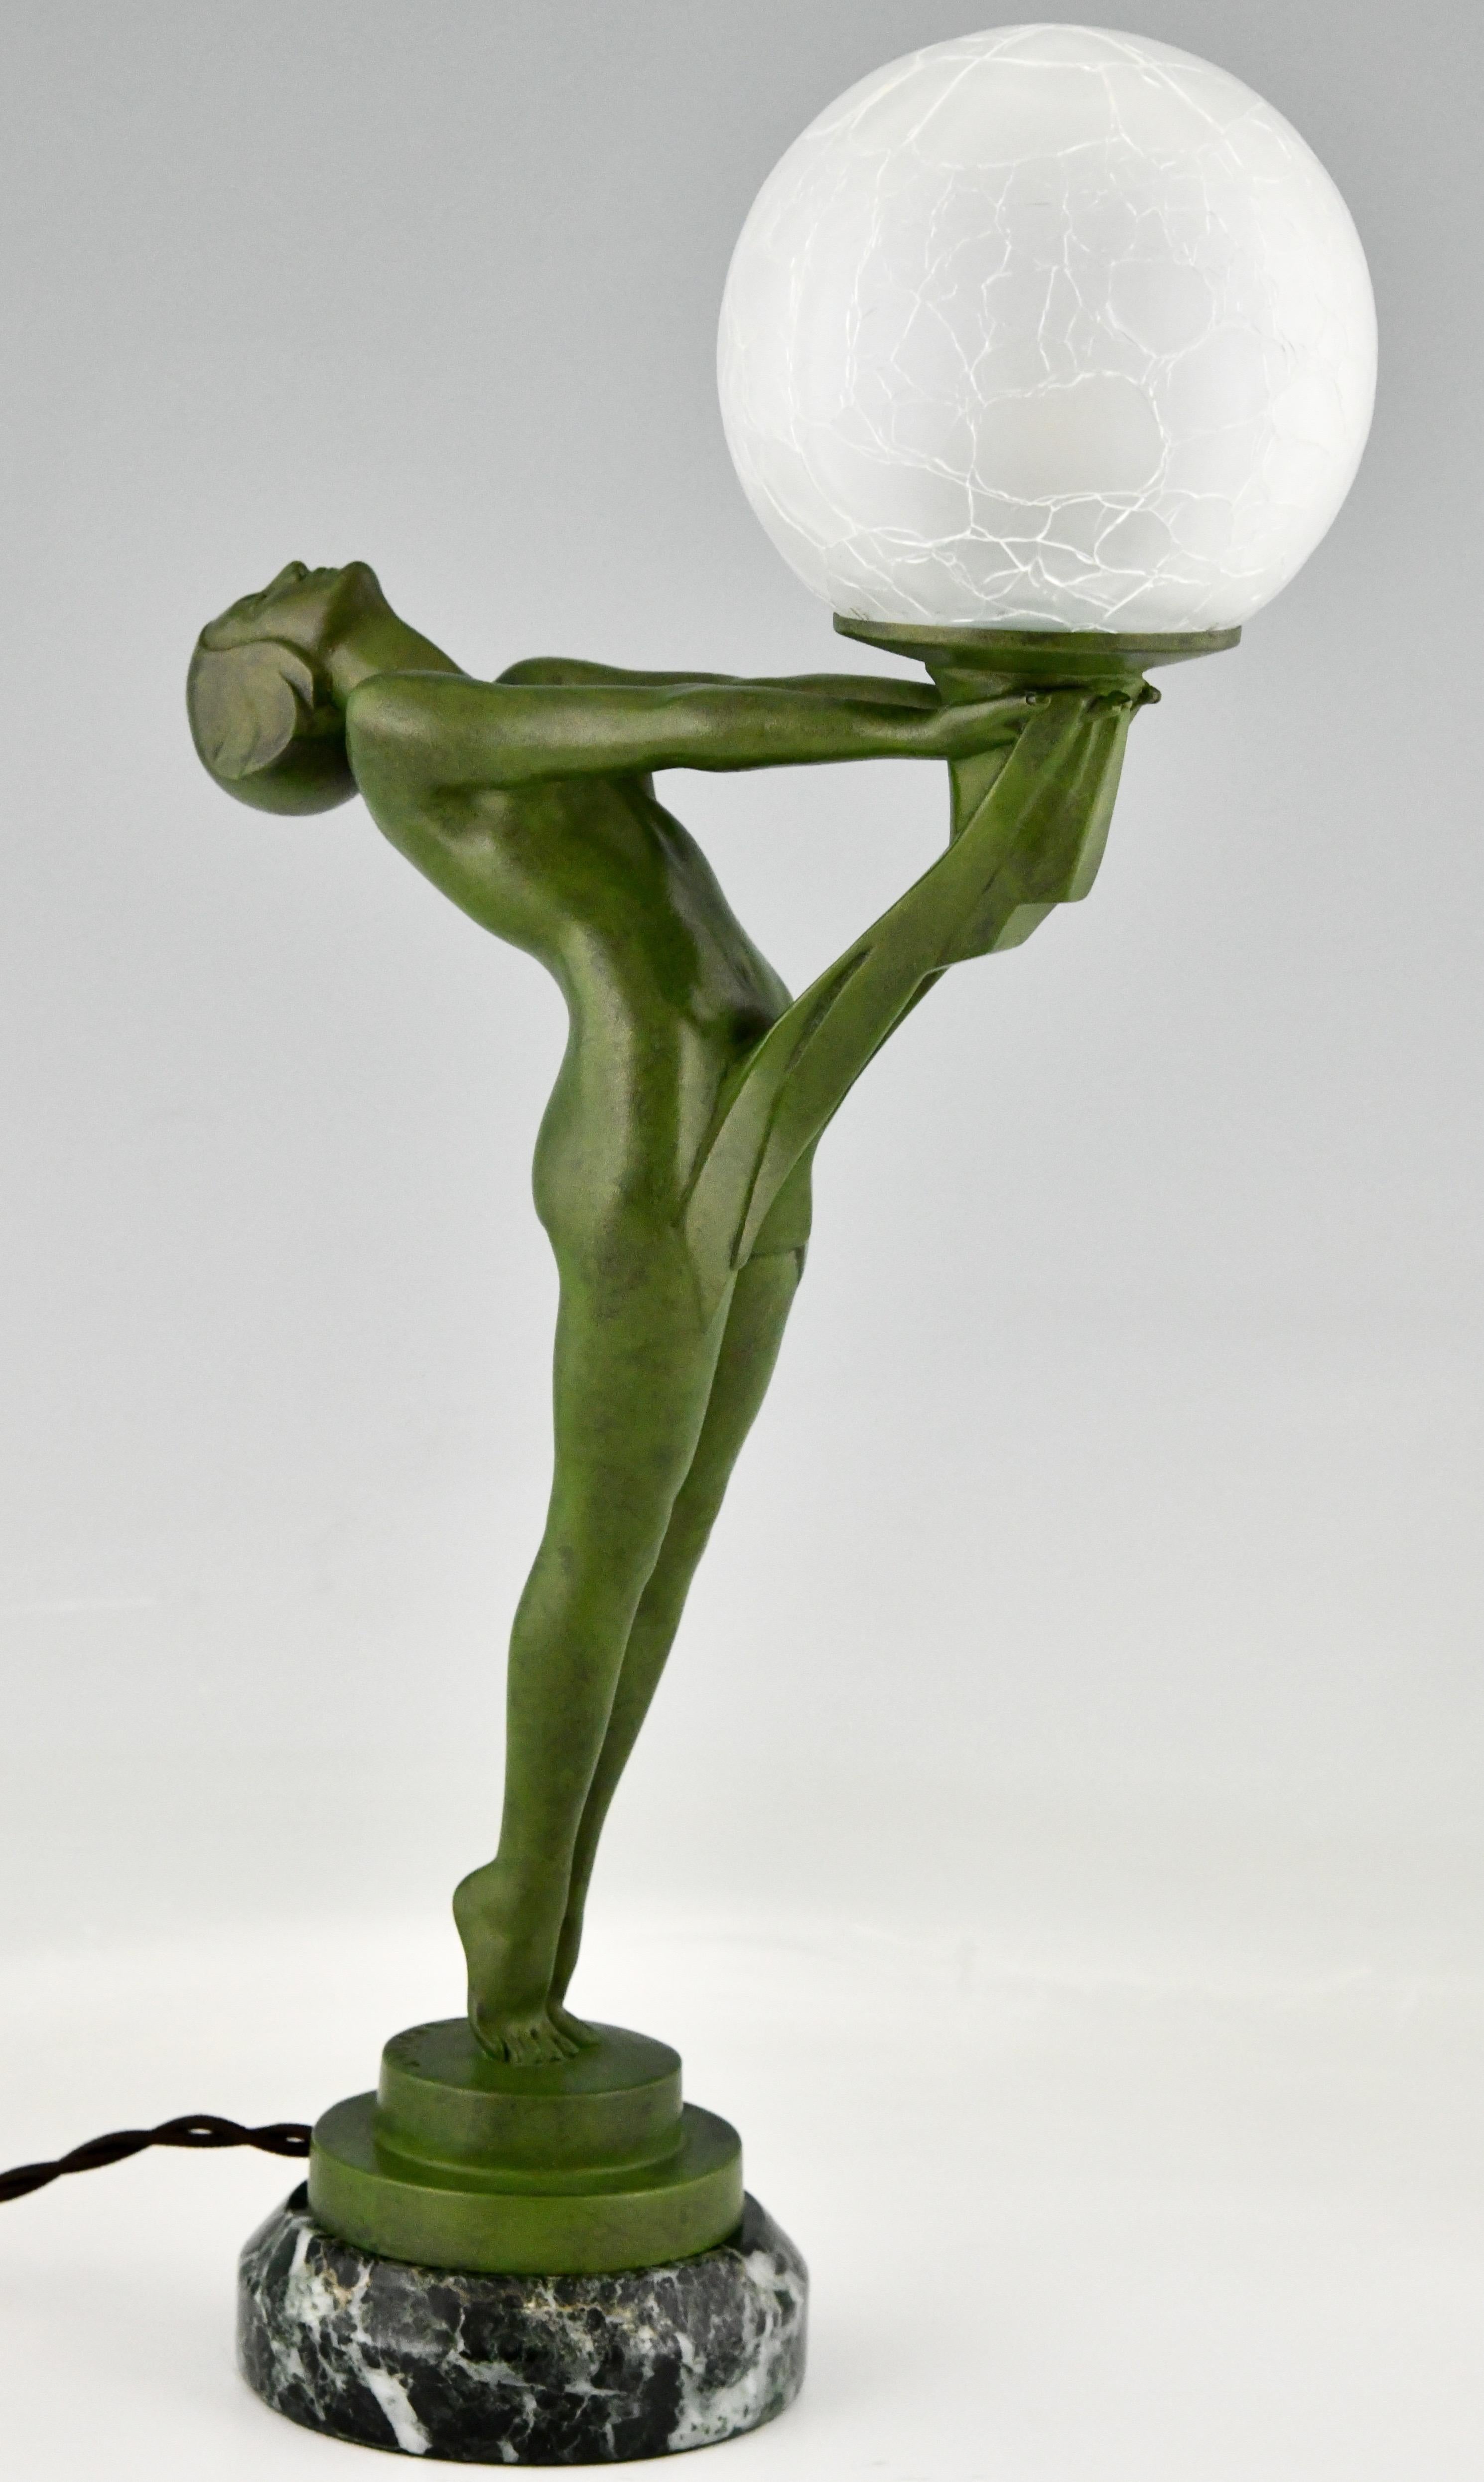 French Art Deco Lamp Standing Nude with Ball Clarté by Max Le Verrier Original 1930 For Sale